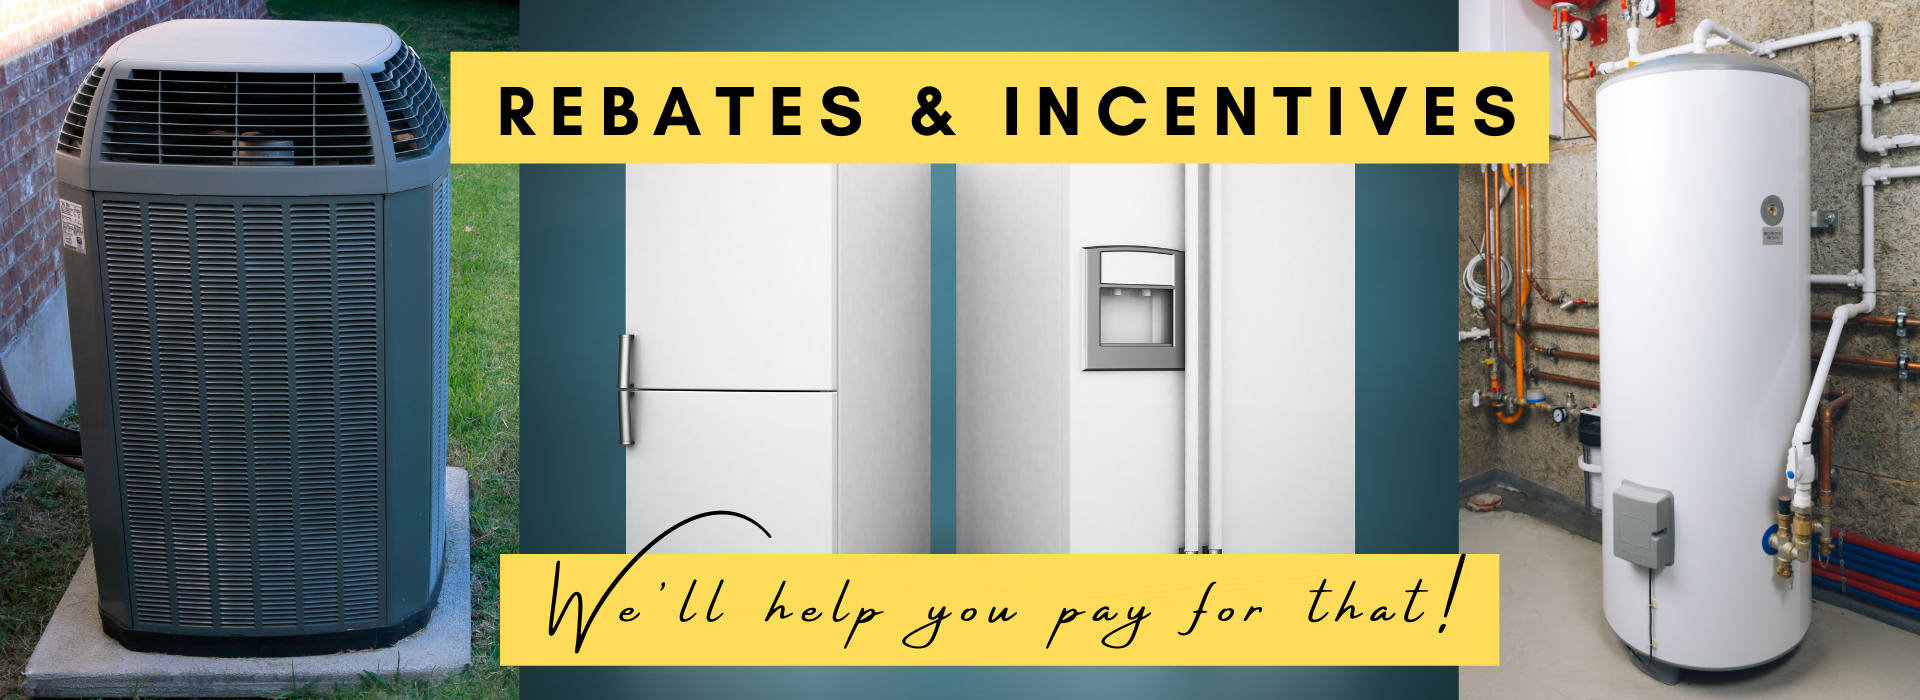 Refrigerator, air conditioner, and water heater rebates